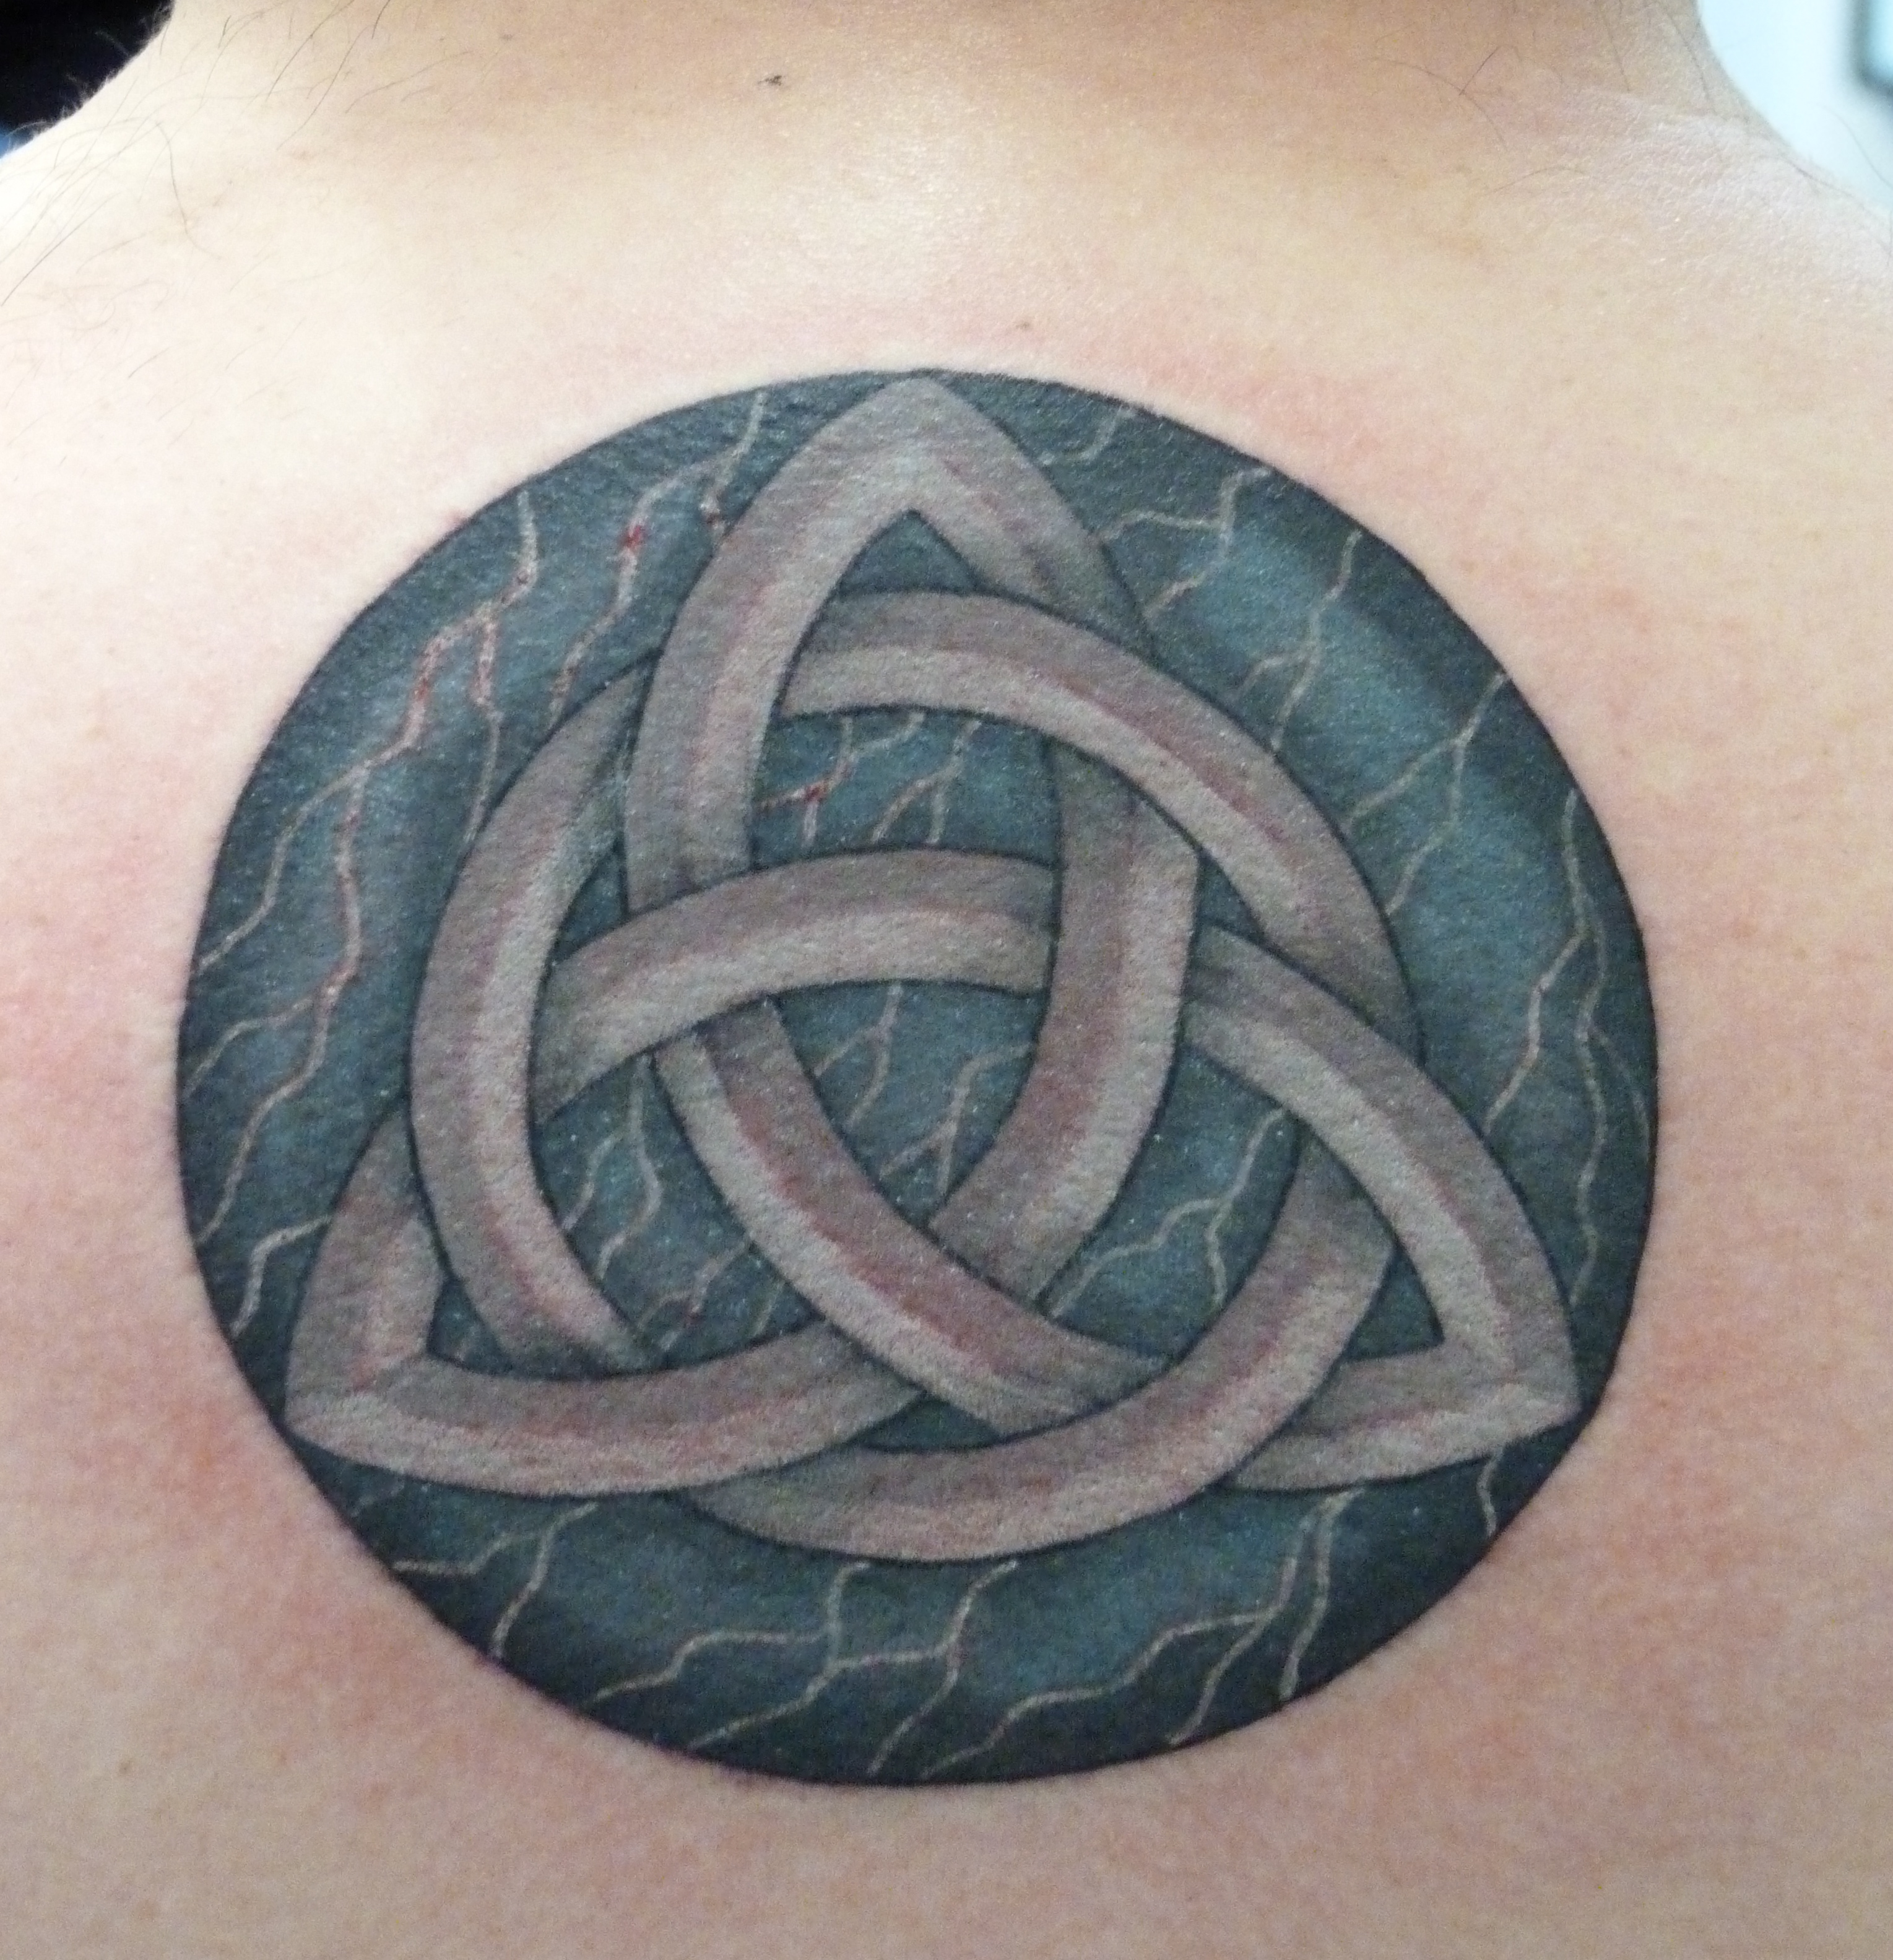 Trinity Tattoos Designs, Ideas and Meaning | Tattoos For You